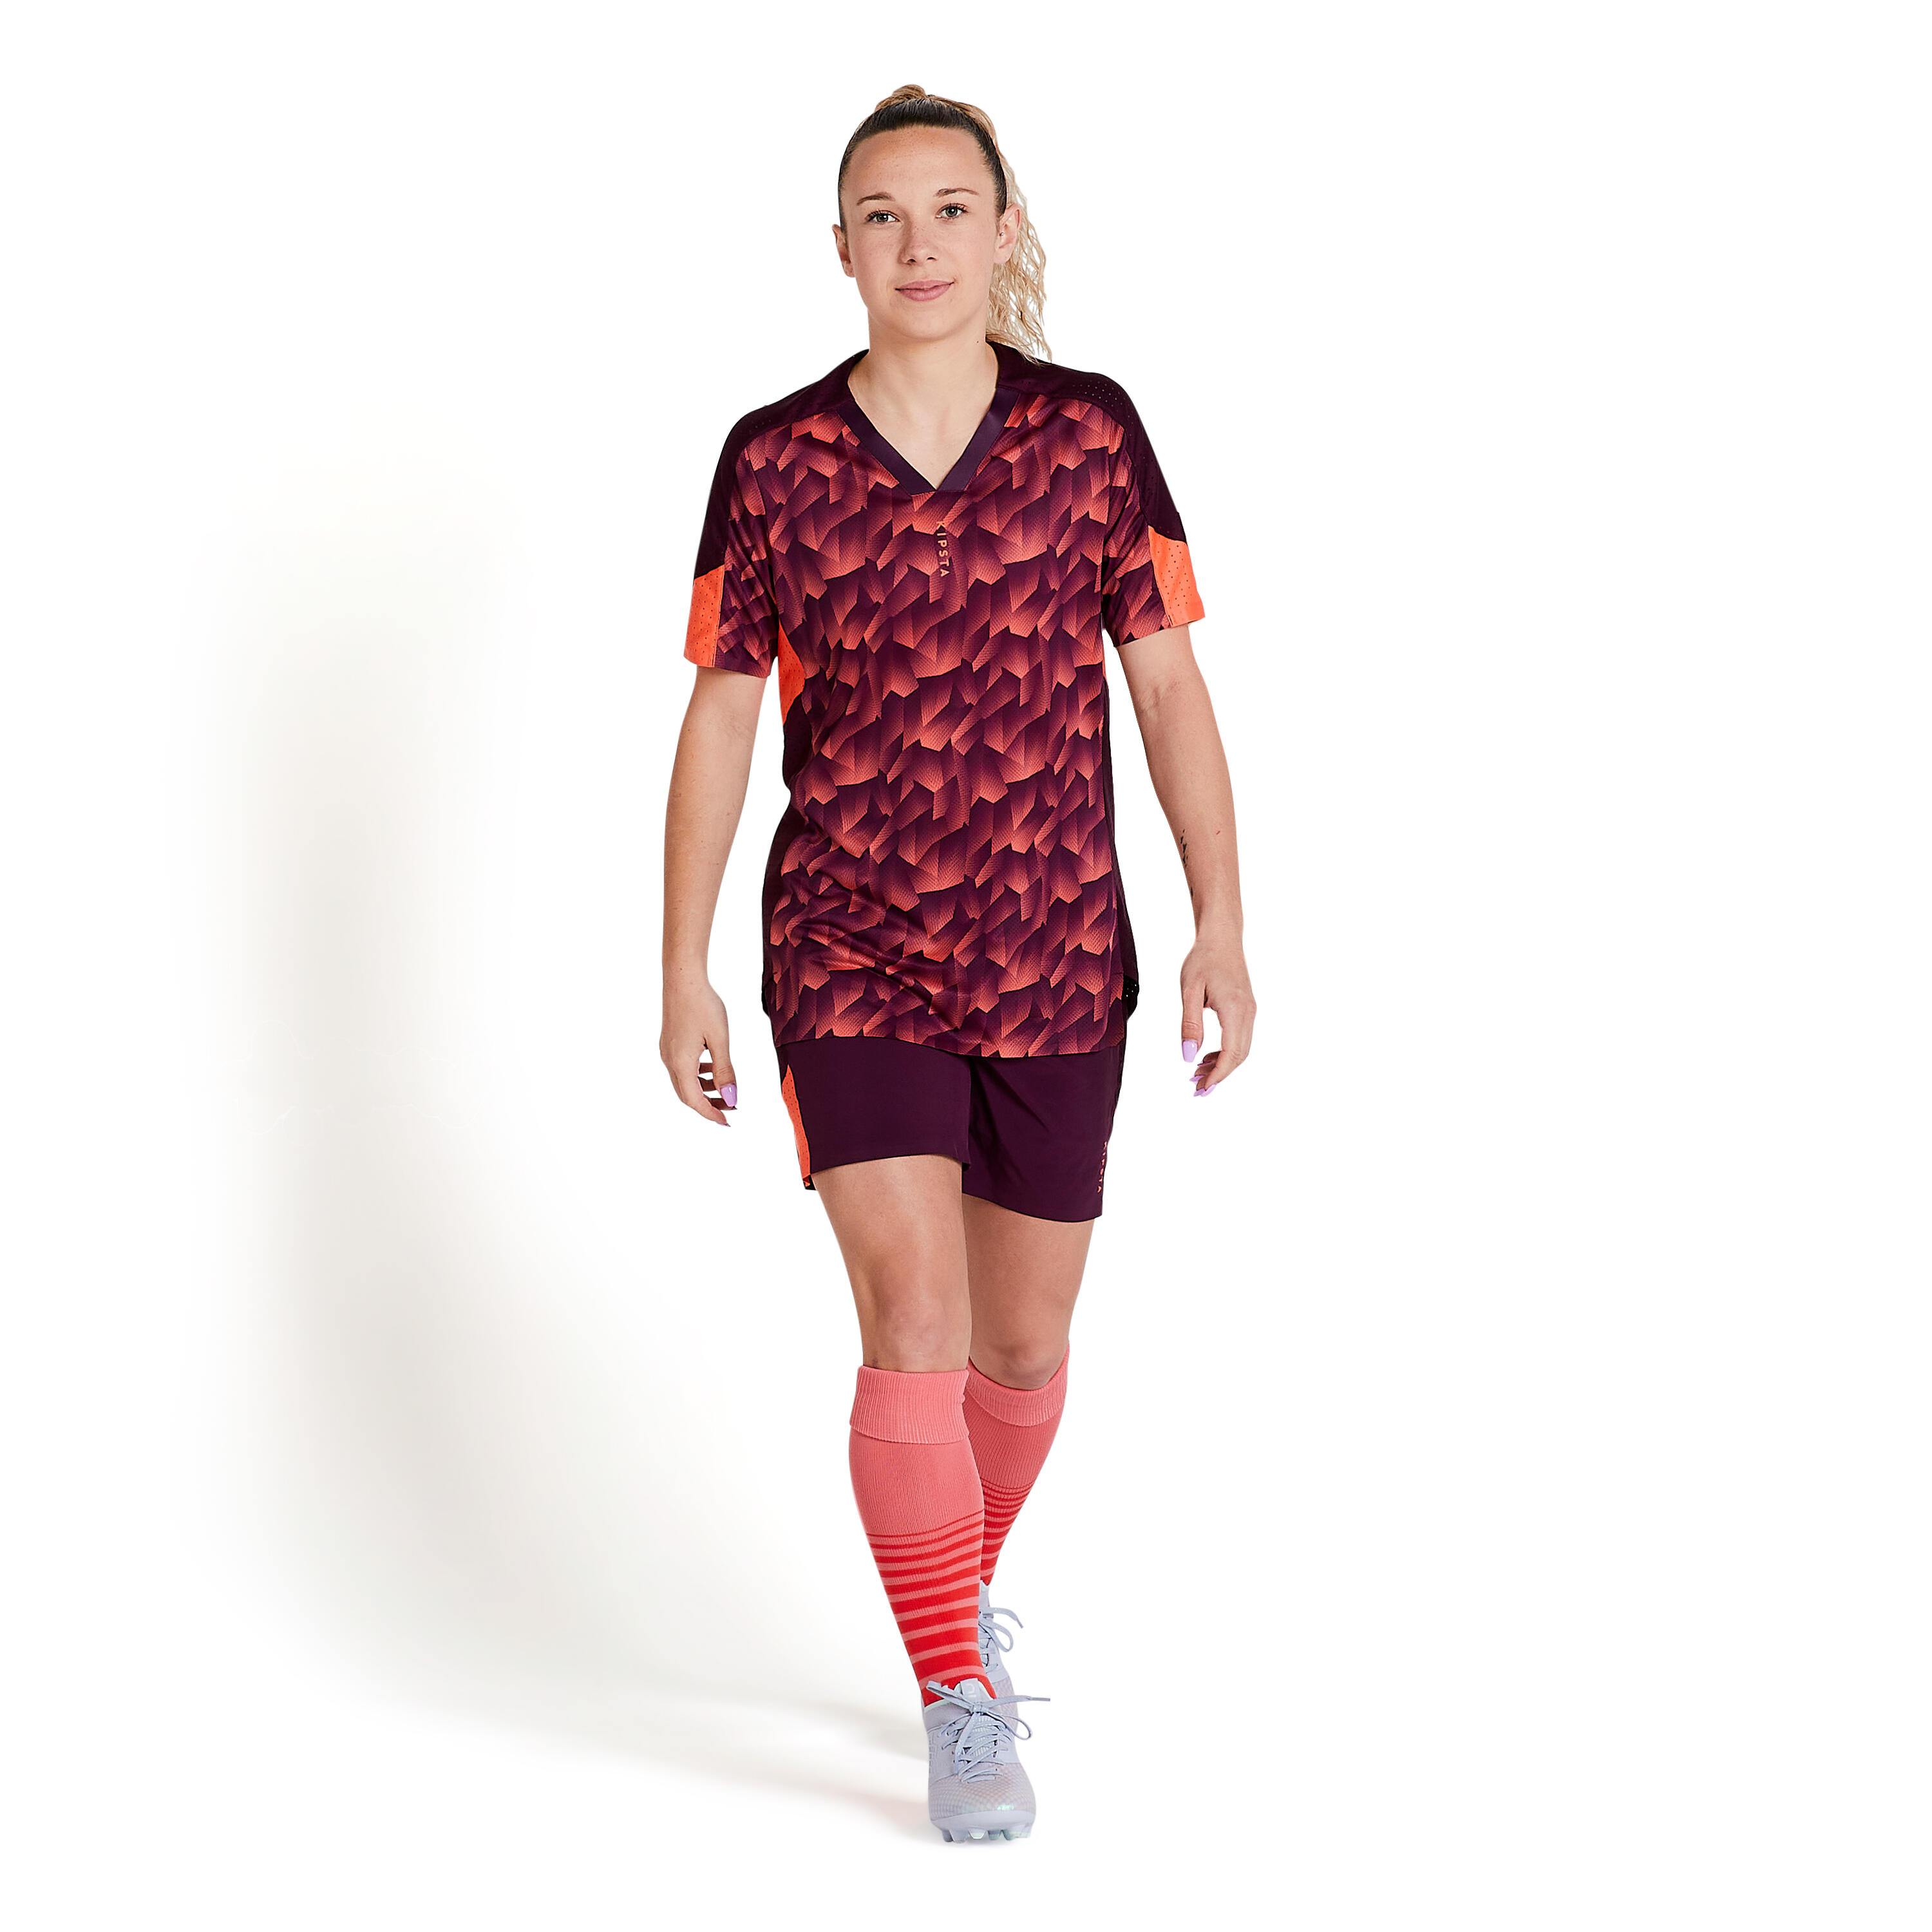 Women's Football Jersey F900 - Coral 24/31